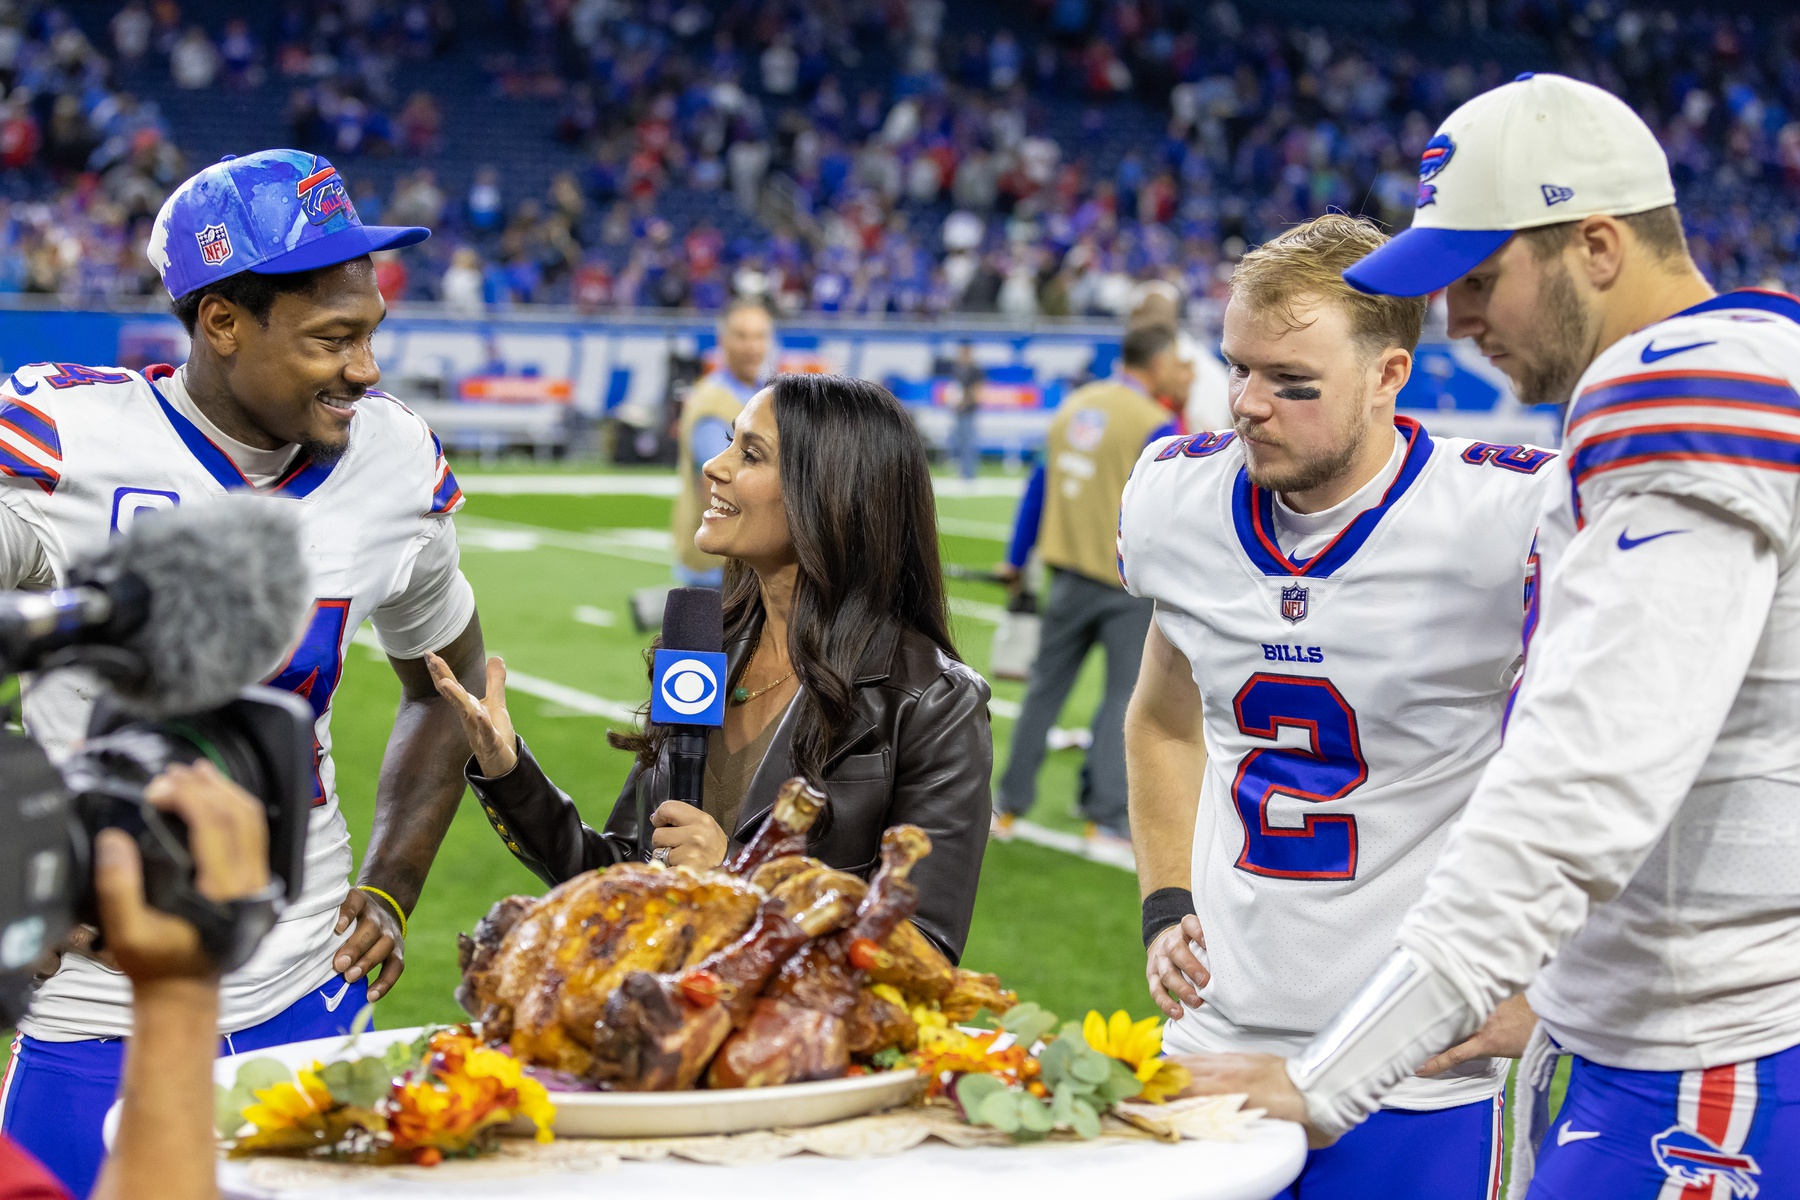 Nov 24, 2022; Detroit, Michigan, USA; Tracy Wolfson of CBS interviews Buffalo Bills wide receiver Stefon Diggs (14), place kicker Tyler Bass (2) and quarterback Josh Allen (17) after the victory against the Detroit Lions at Ford Field. Mandatory Credit: David Reginek-USA TODAY Sports